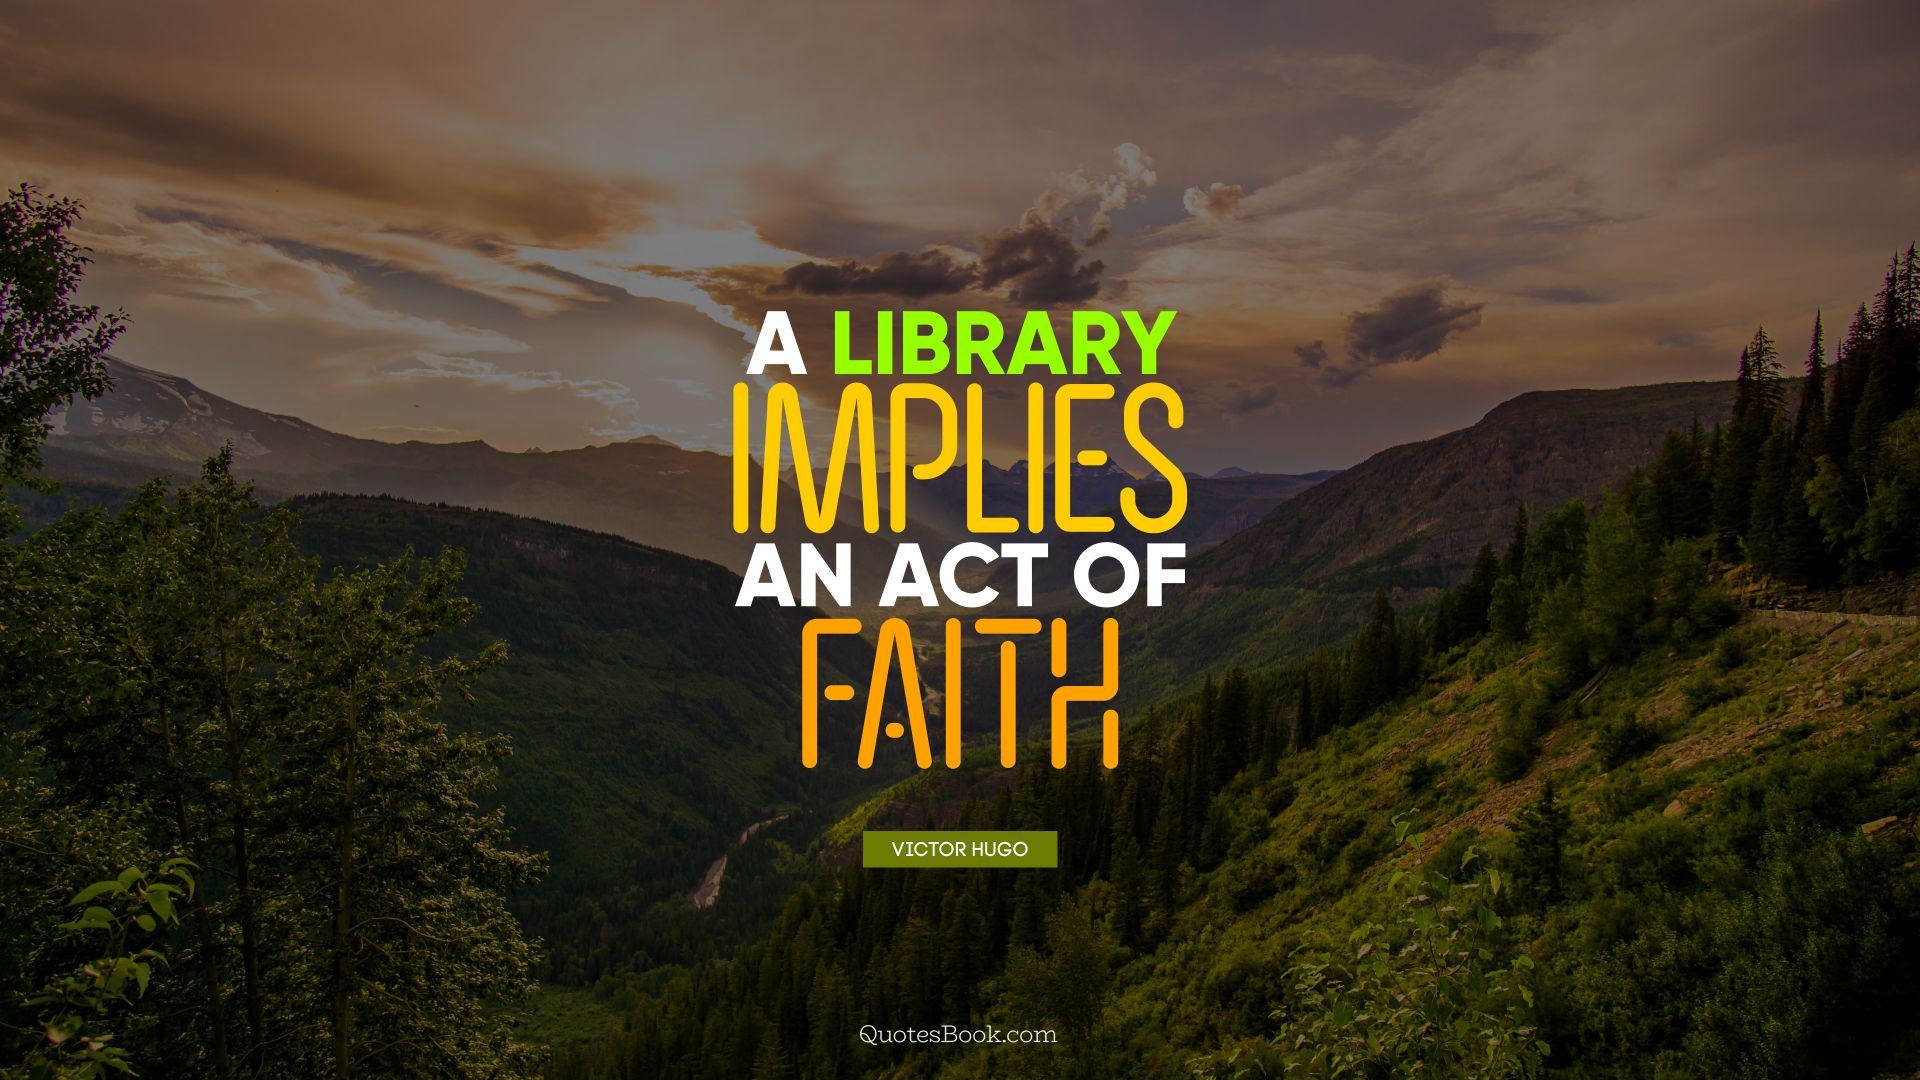 A library implies an act of faith. - Quote by Victor Hugo